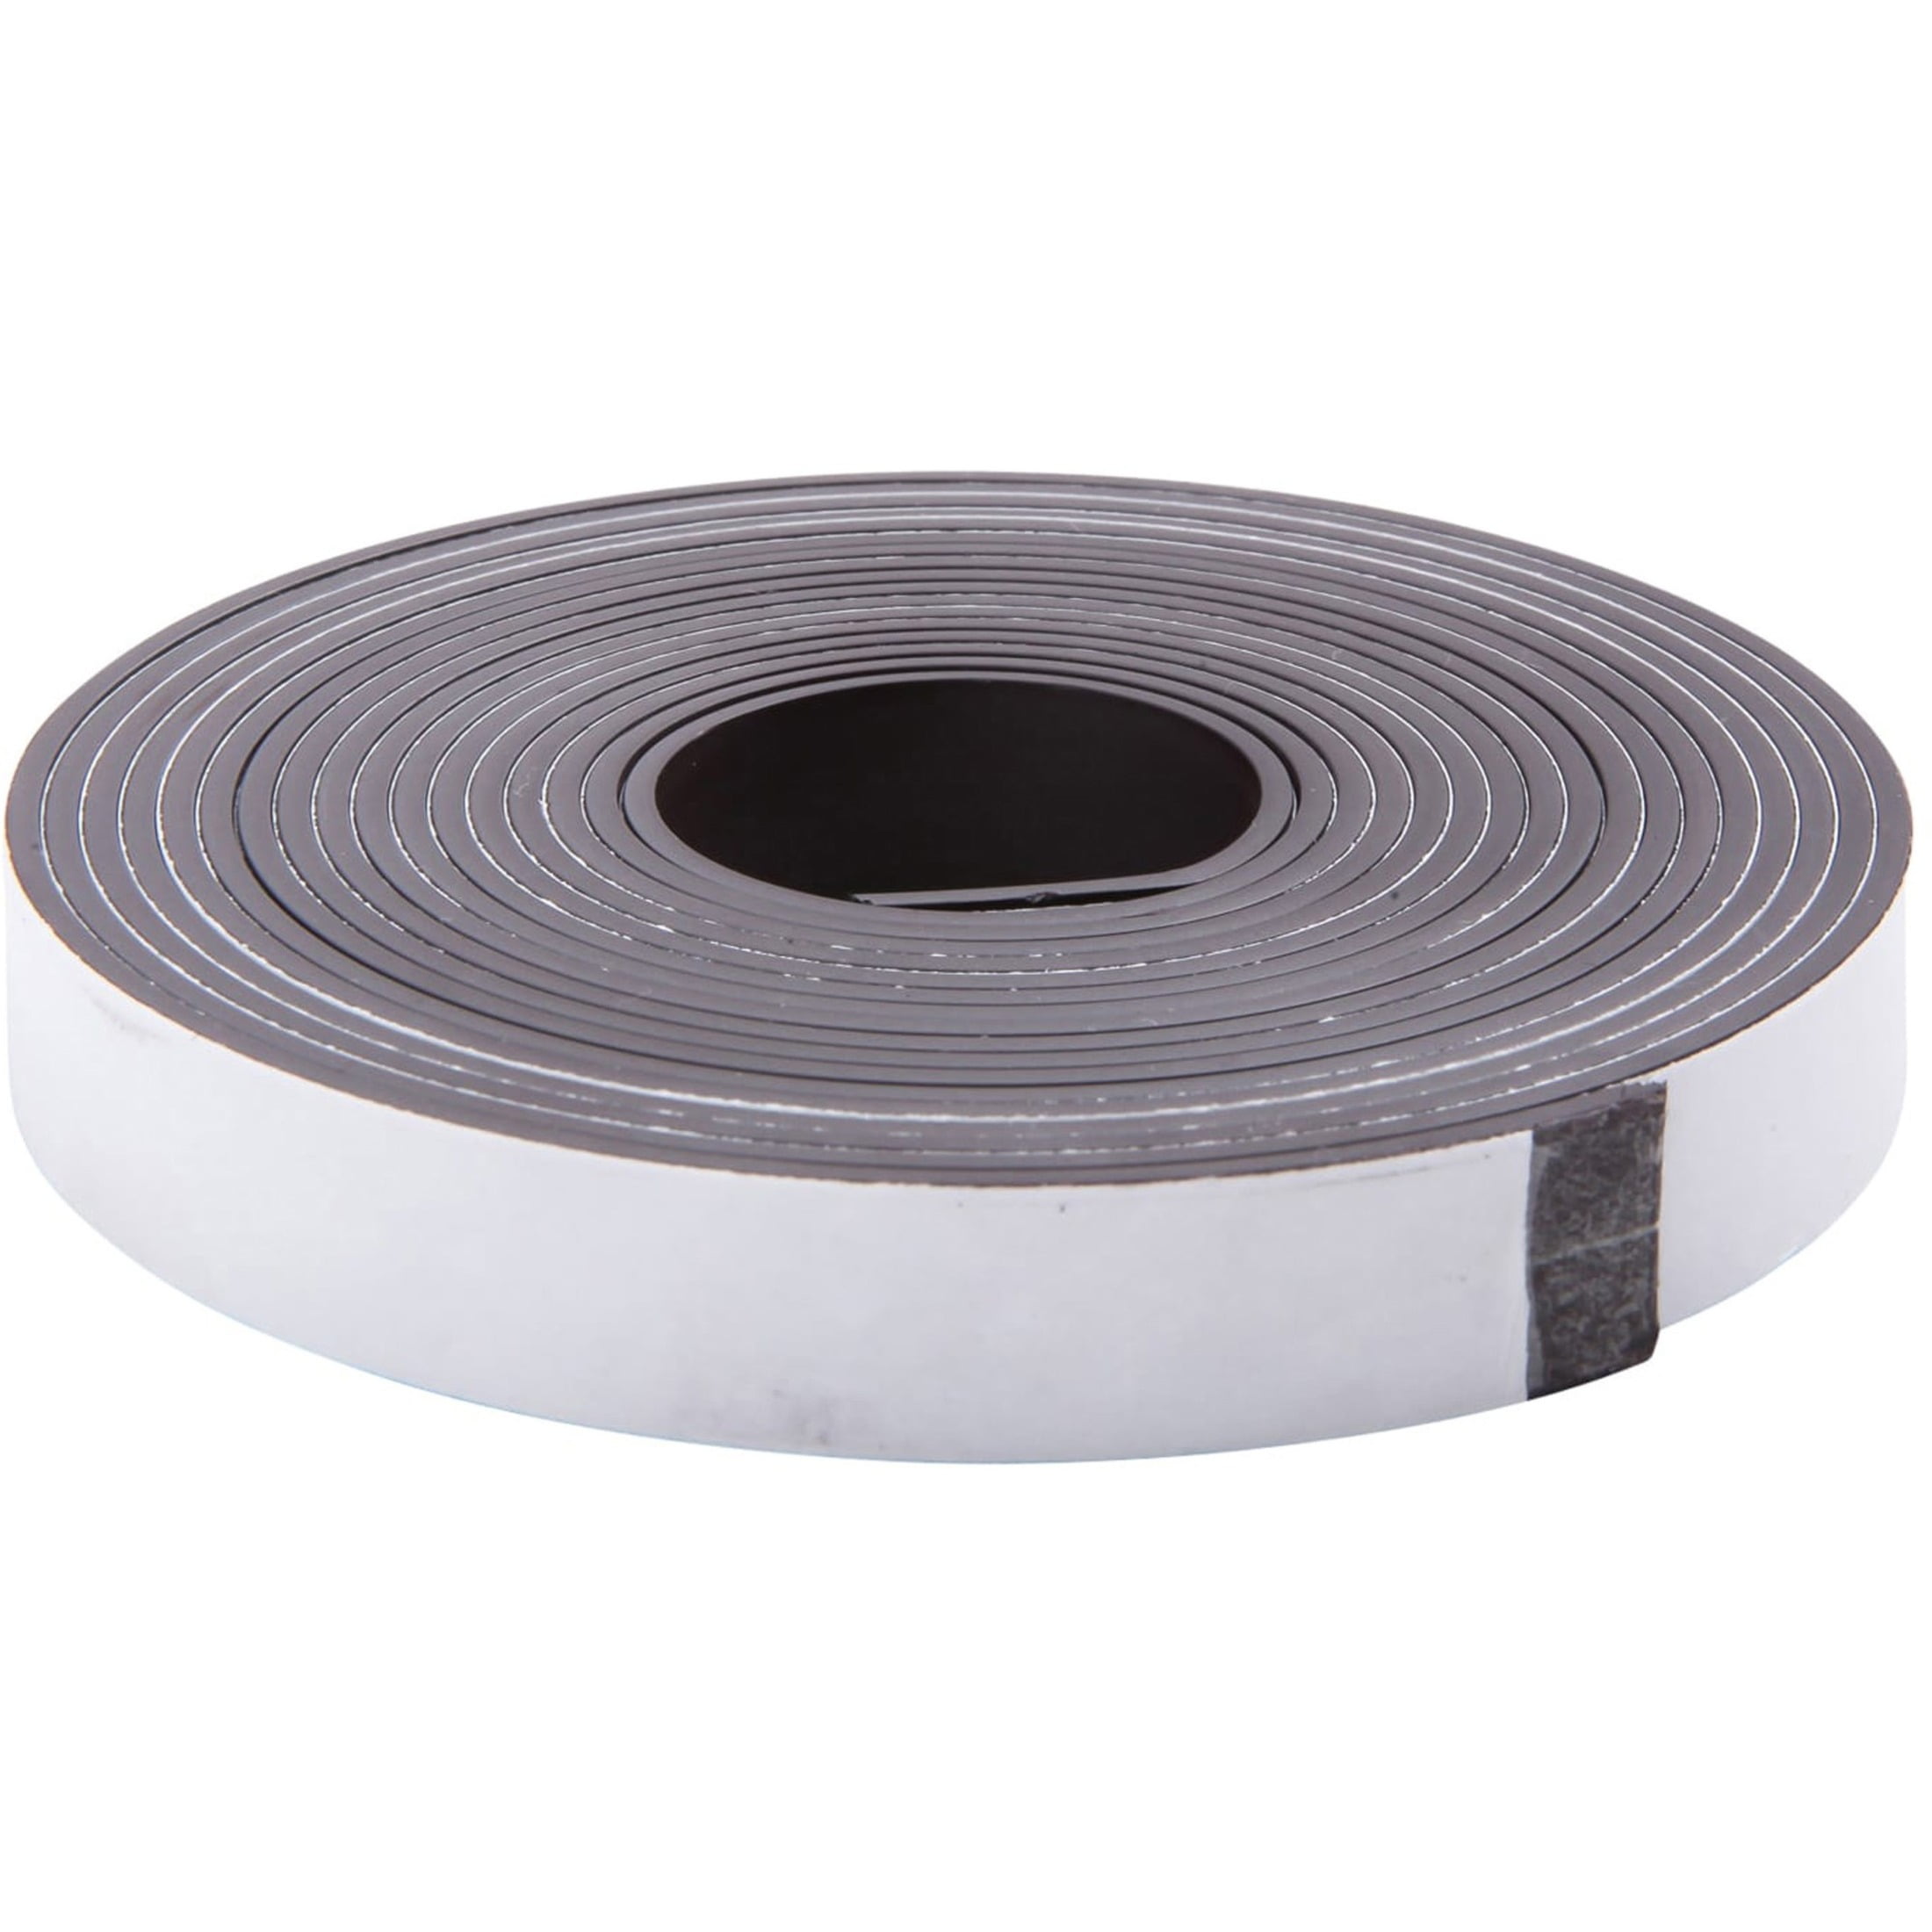 Adhesive Magnetic Strip - 120 Mil Thick - Incredibly Strong Flexible  Adhesive Magnetic Tape - 2 wide x 10 Feet - The STRONGEST and THICKEST  Magnetic